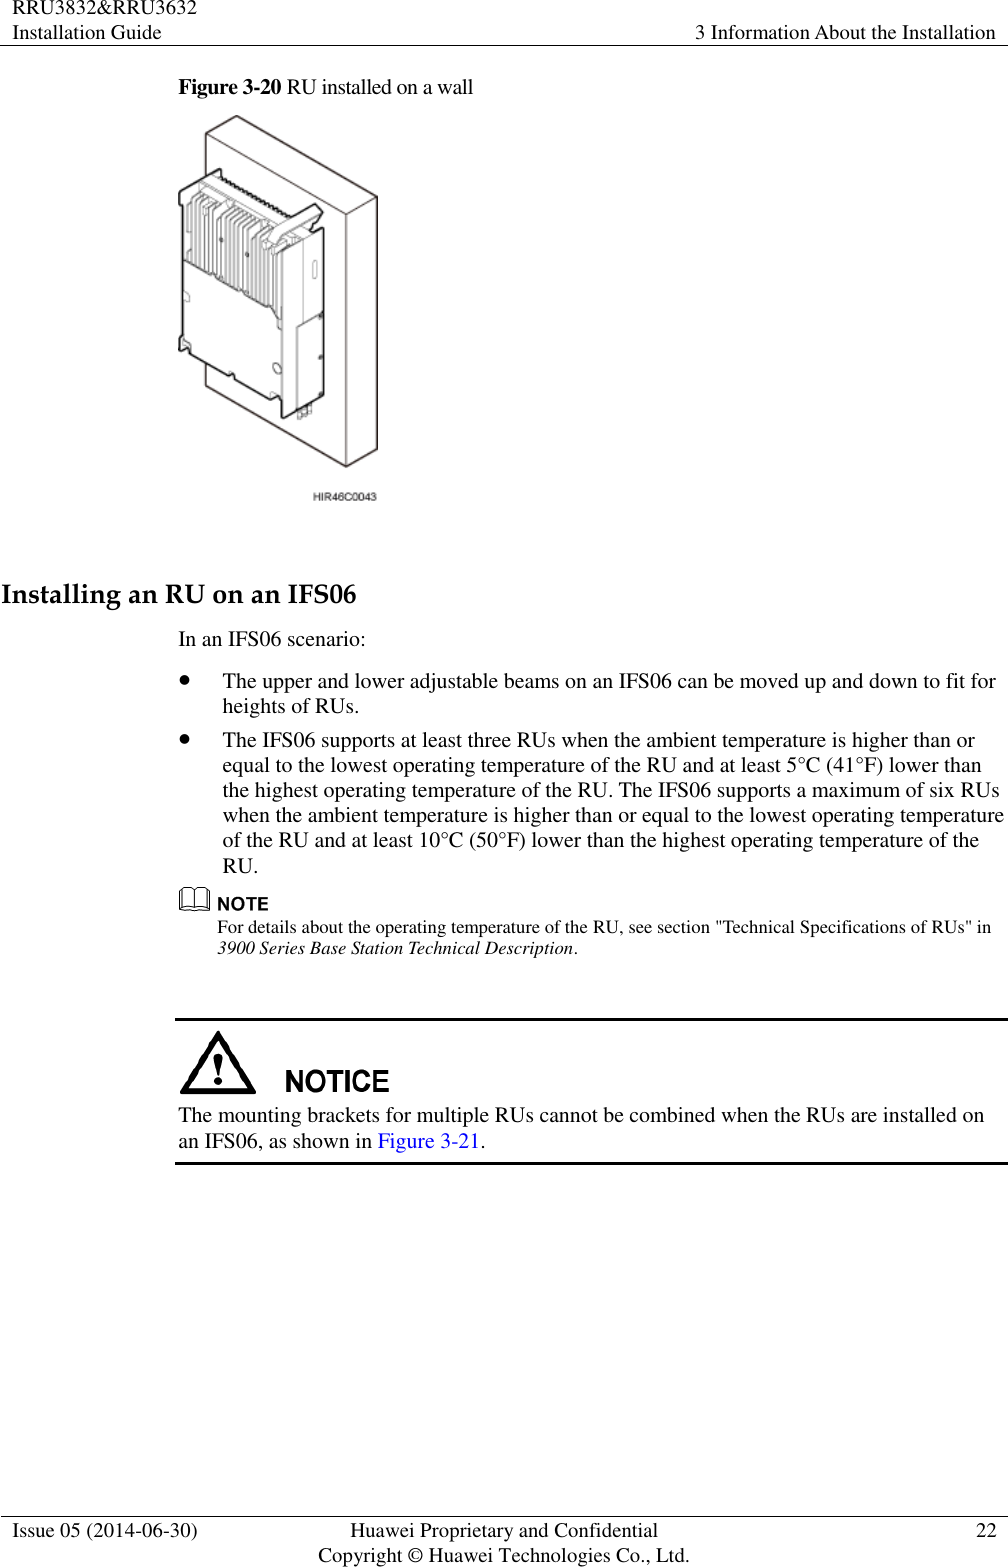 RRU3832&amp;RRU3632 Installation Guide 3 Information About the Installation  Issue 05 (2014-06-30) Huawei Proprietary and Confidential                                     Copyright © Huawei Technologies Co., Ltd. 22  Figure 3-20 RU installed on a wall   Installing an RU on an IFS06 In an IFS06 scenario:  The upper and lower adjustable beams on an IFS06 can be moved up and down to fit for heights of RUs.  The IFS06 supports at least three RUs when the ambient temperature is higher than or equal to the lowest operating temperature of the RU and at least 5°C (41°F) lower than the highest operating temperature of the RU. The IFS06 supports a maximum of six RUs when the ambient temperature is higher than or equal to the lowest operating temperature of the RU and at least 10°C (50°F) lower than the highest operating temperature of the RU.  For details about the operating temperature of the RU, see section &quot;Technical Specifications of RUs&quot; in 3900 Series Base Station Technical Description.   The mounting brackets for multiple RUs cannot be combined when the RUs are installed on an IFS06, as shown in Figure 3-21. 